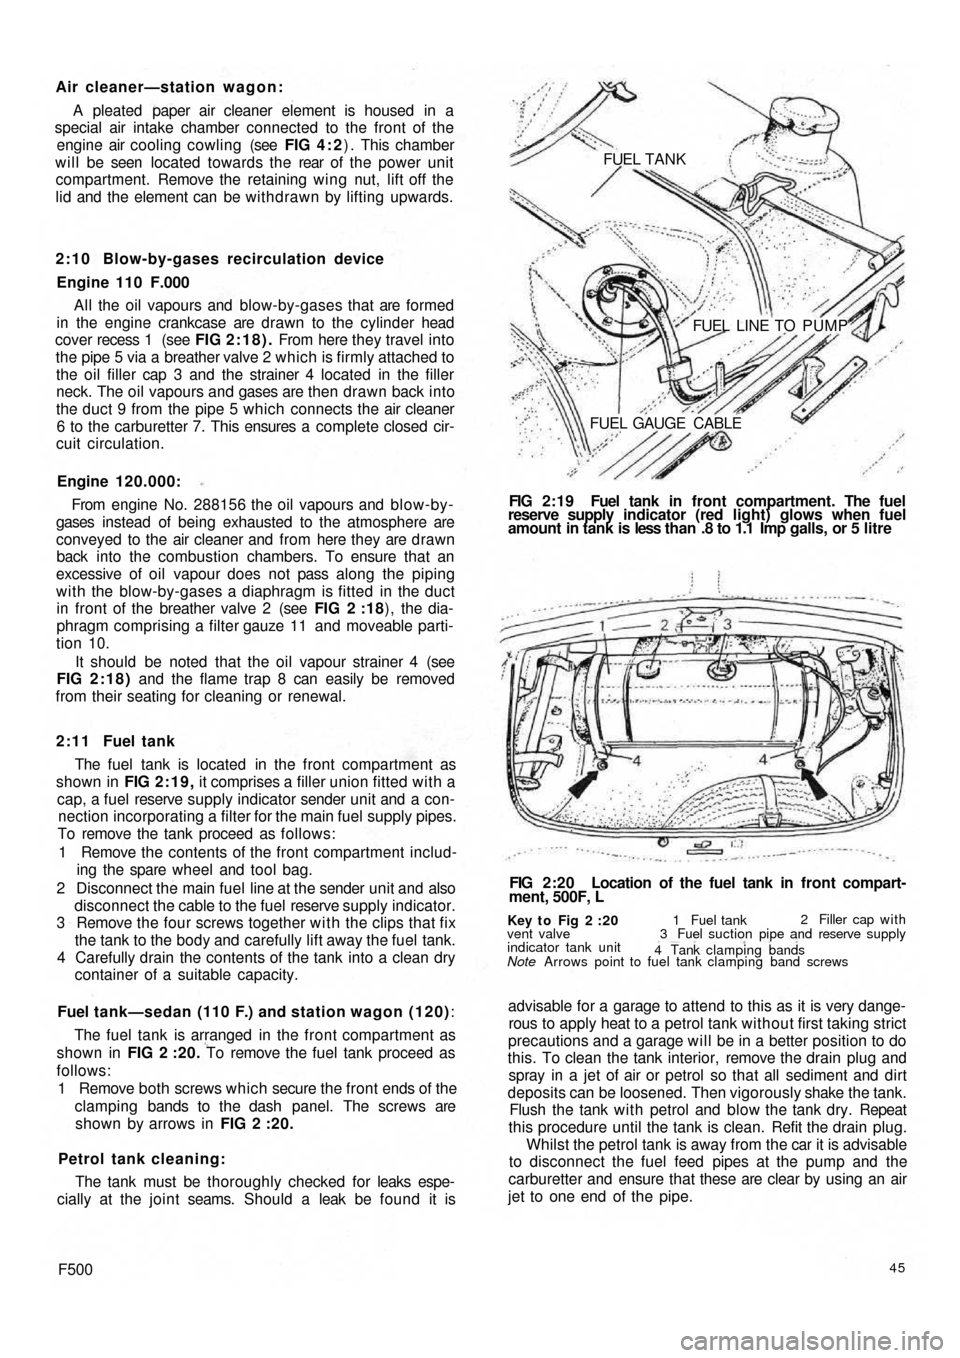 FIAT 500 1957 1.G Owners Manual Air cleaner—station wagon:
A pleated paper air cleaner element is housed  in a
special air intake chamber connected to the front of the
engine air cooling cowling (see FIG 4 : 2) . This chamber
will